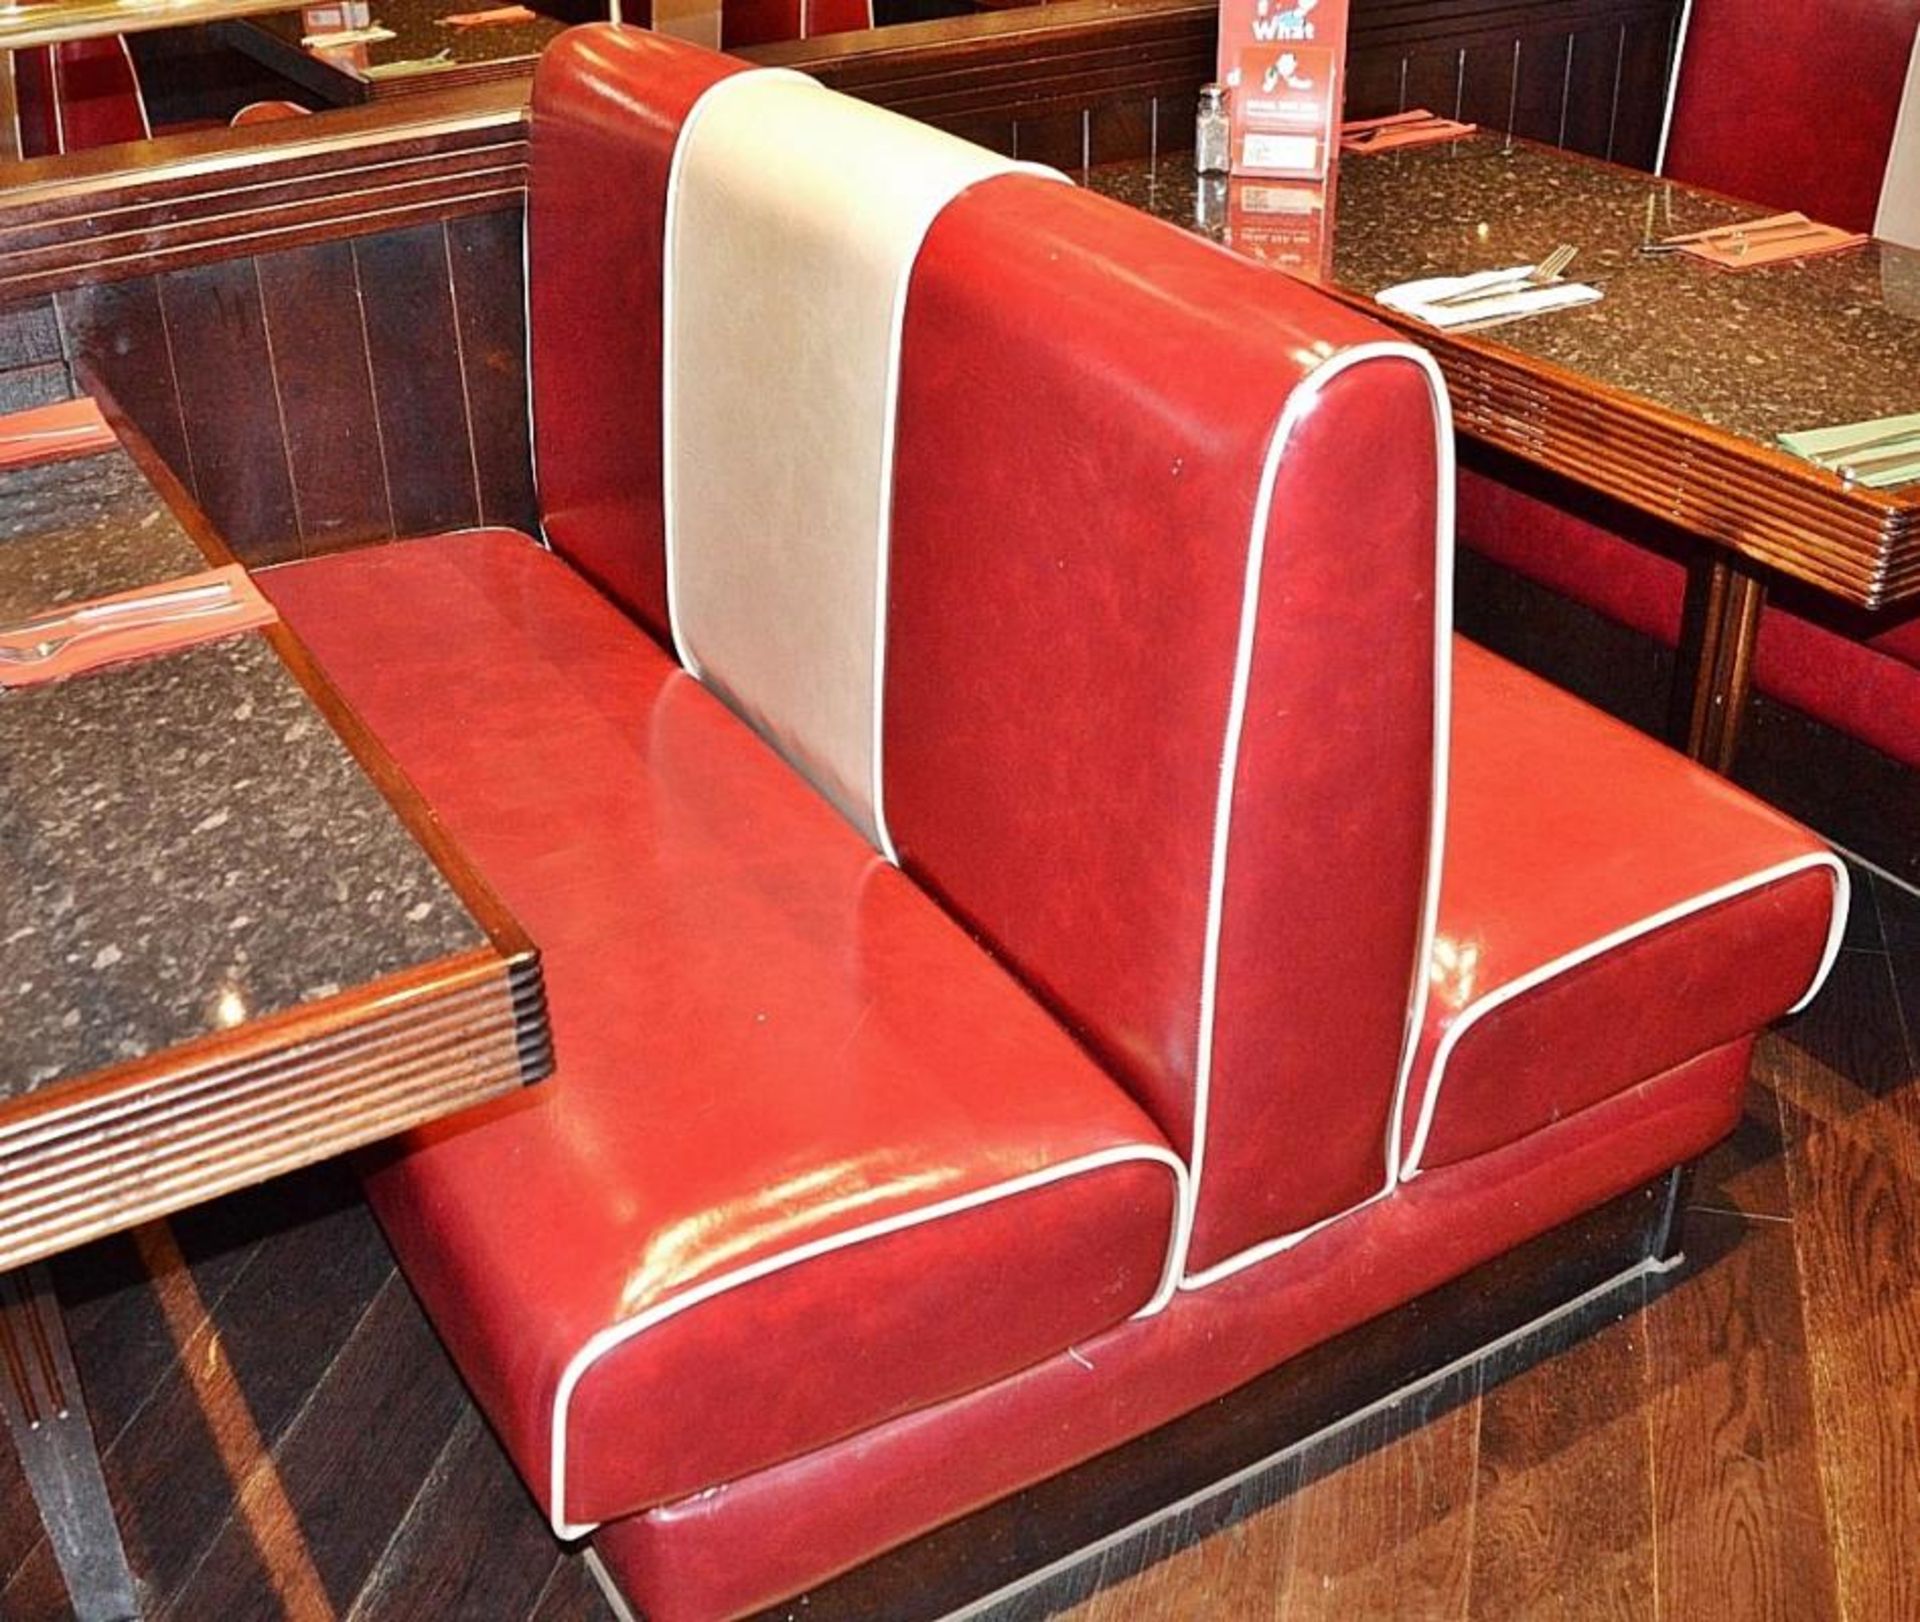 1 x Contemporary Double-Sided Booth Seating Upholstered In A Bright Red Faux Leather - H100 x W120 x - Image 2 of 4